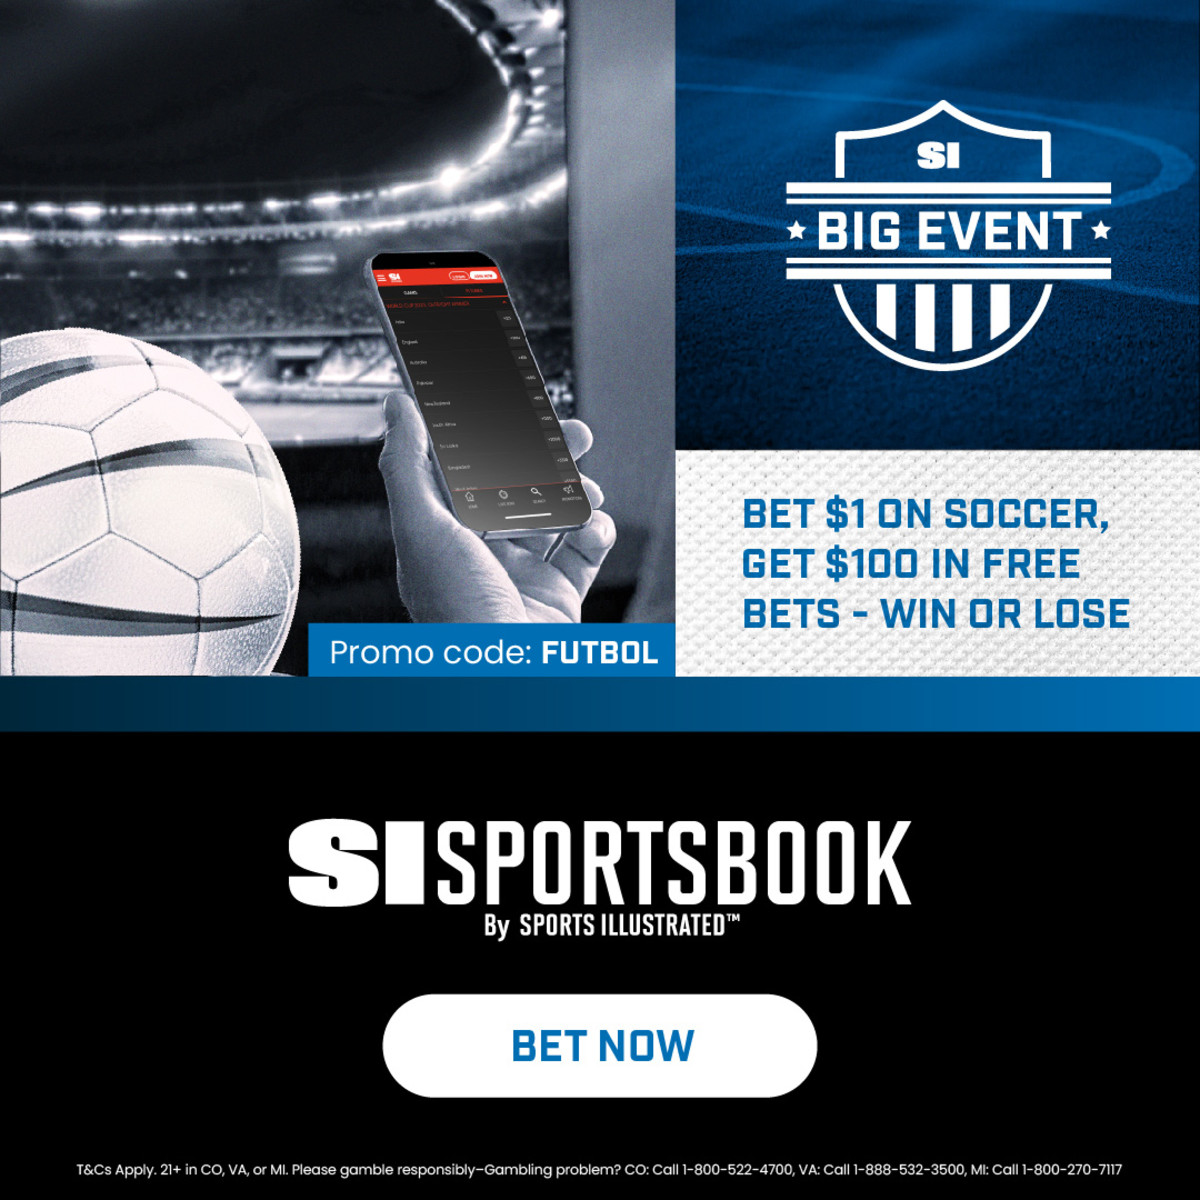 Bet $1 on soccer and get $100 in free bets – win or lose